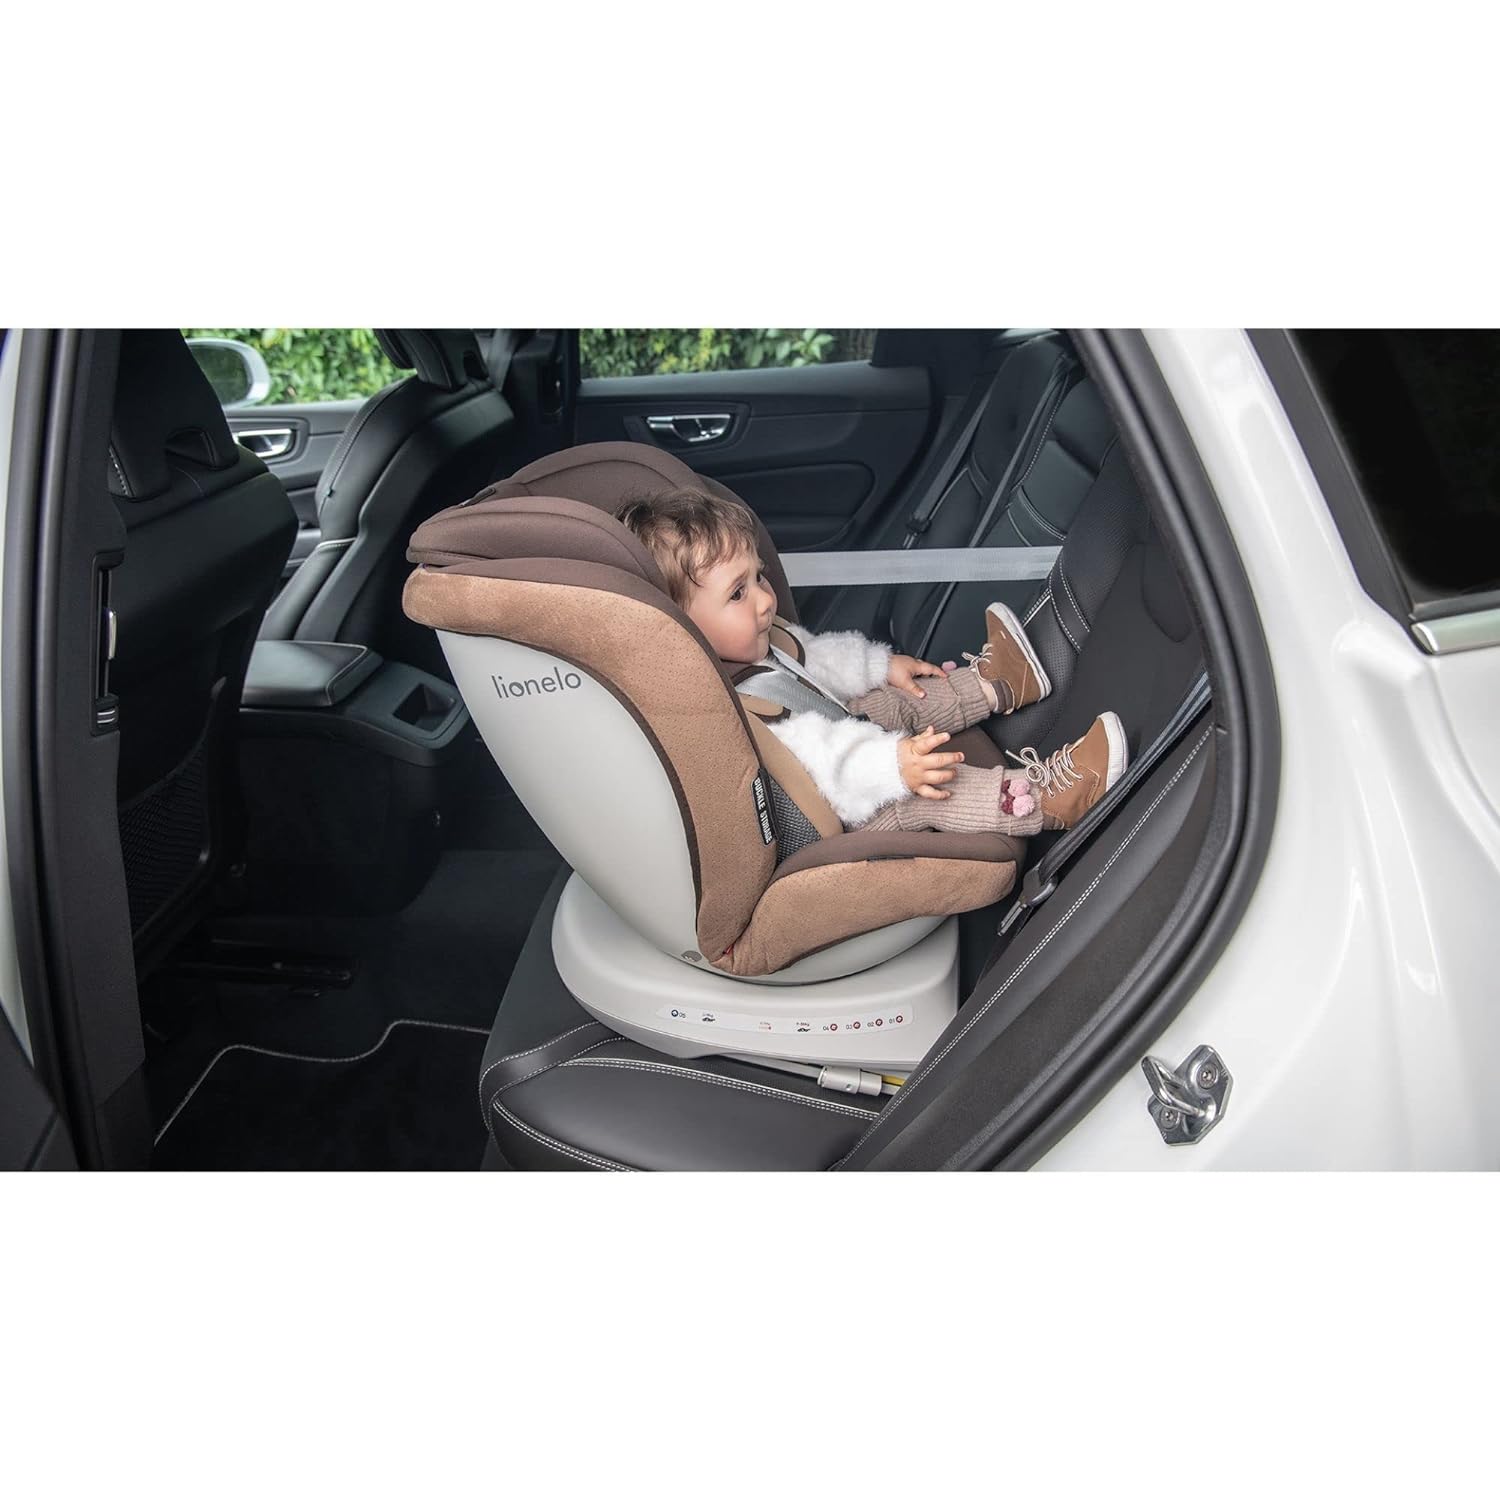 LIONELO Bastiaan One Child Seat from Birth 0-36 kg Isofix Top Tether 360 Degree Rotating Backwards Forward Side Protection 5-Point Seat Belts Dri-Seat (Grey)